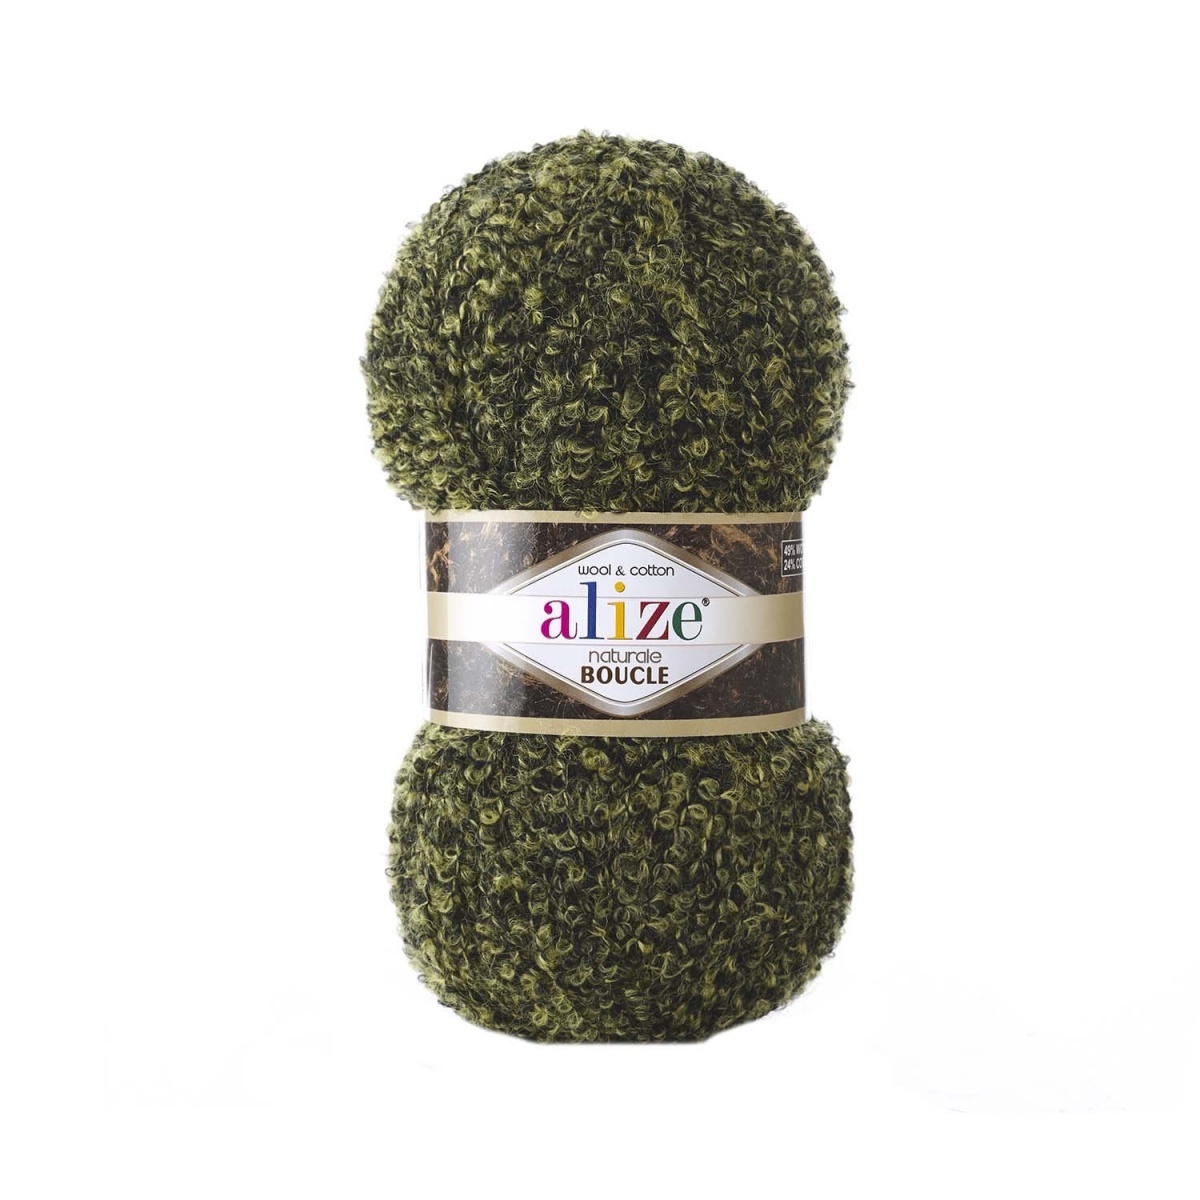 Alize Naturale Boucle, 49% Wool, 24% Cotton, 24% Acrylic, 3% Polyester 5 Skein Value Pack, 500g фото 1